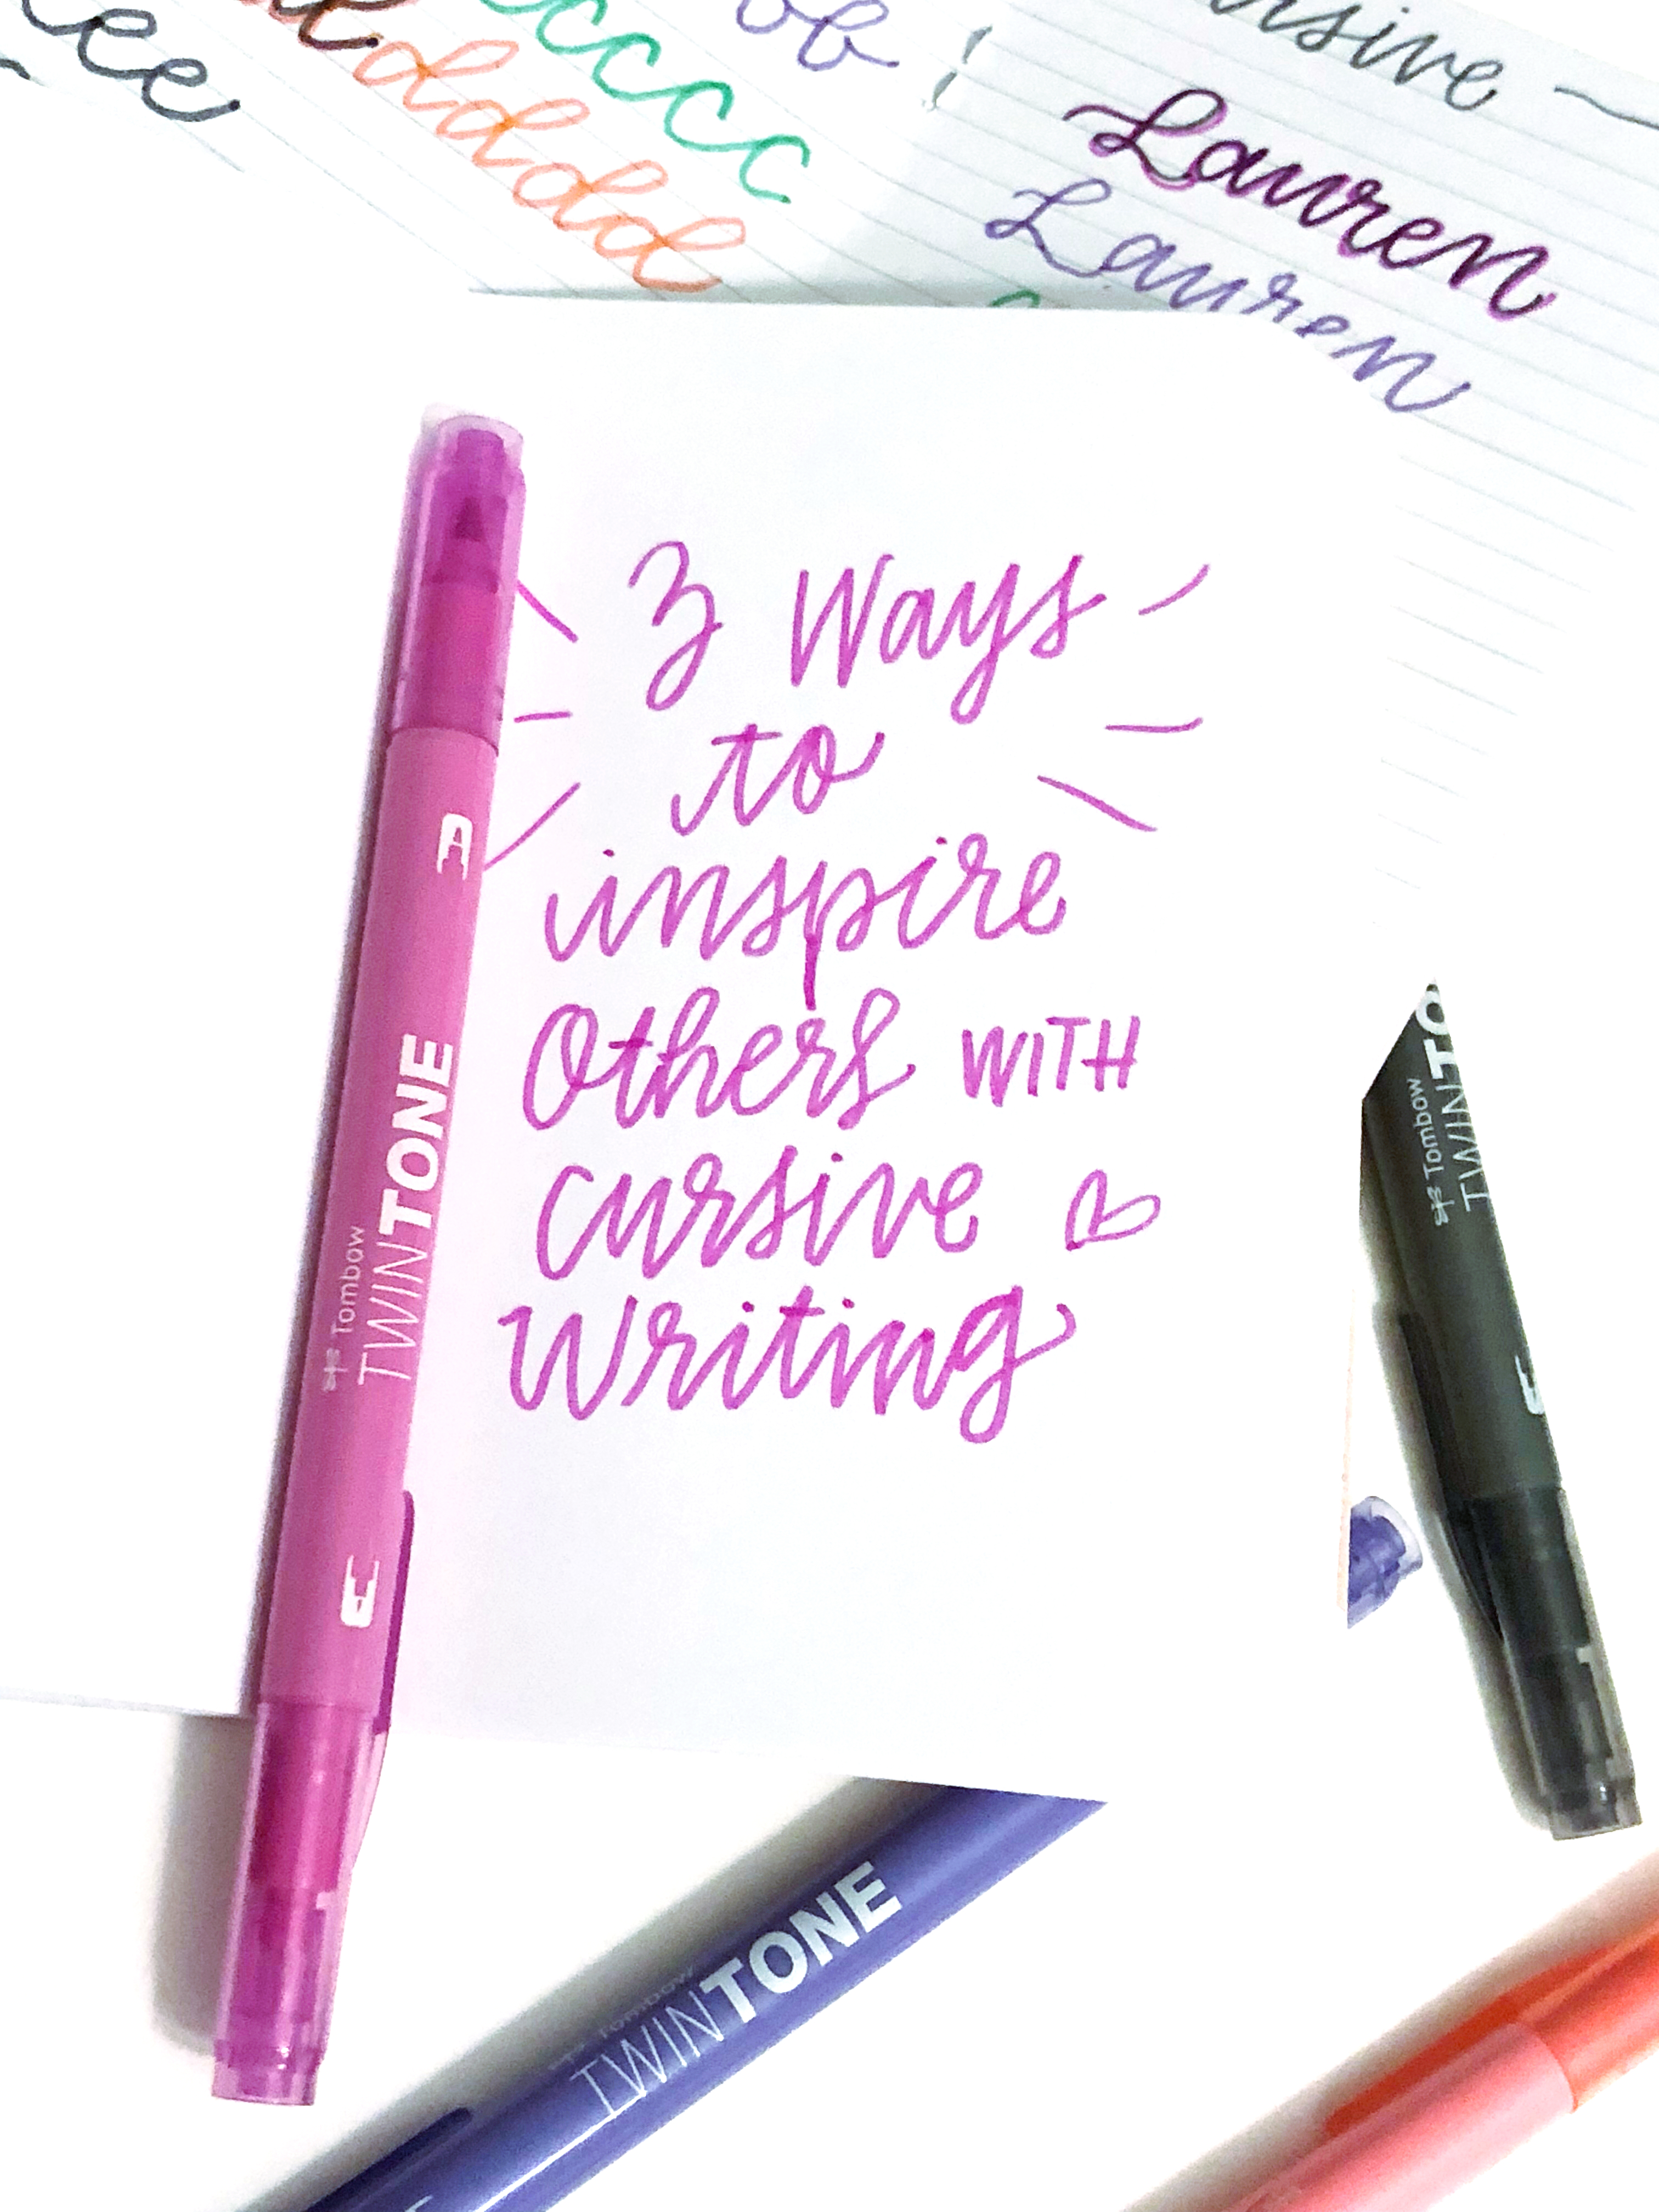 Lauren Fitzmaurice of @renmadecalligraphy shares 3 fun ways to use Cursive Writing to inspire others.